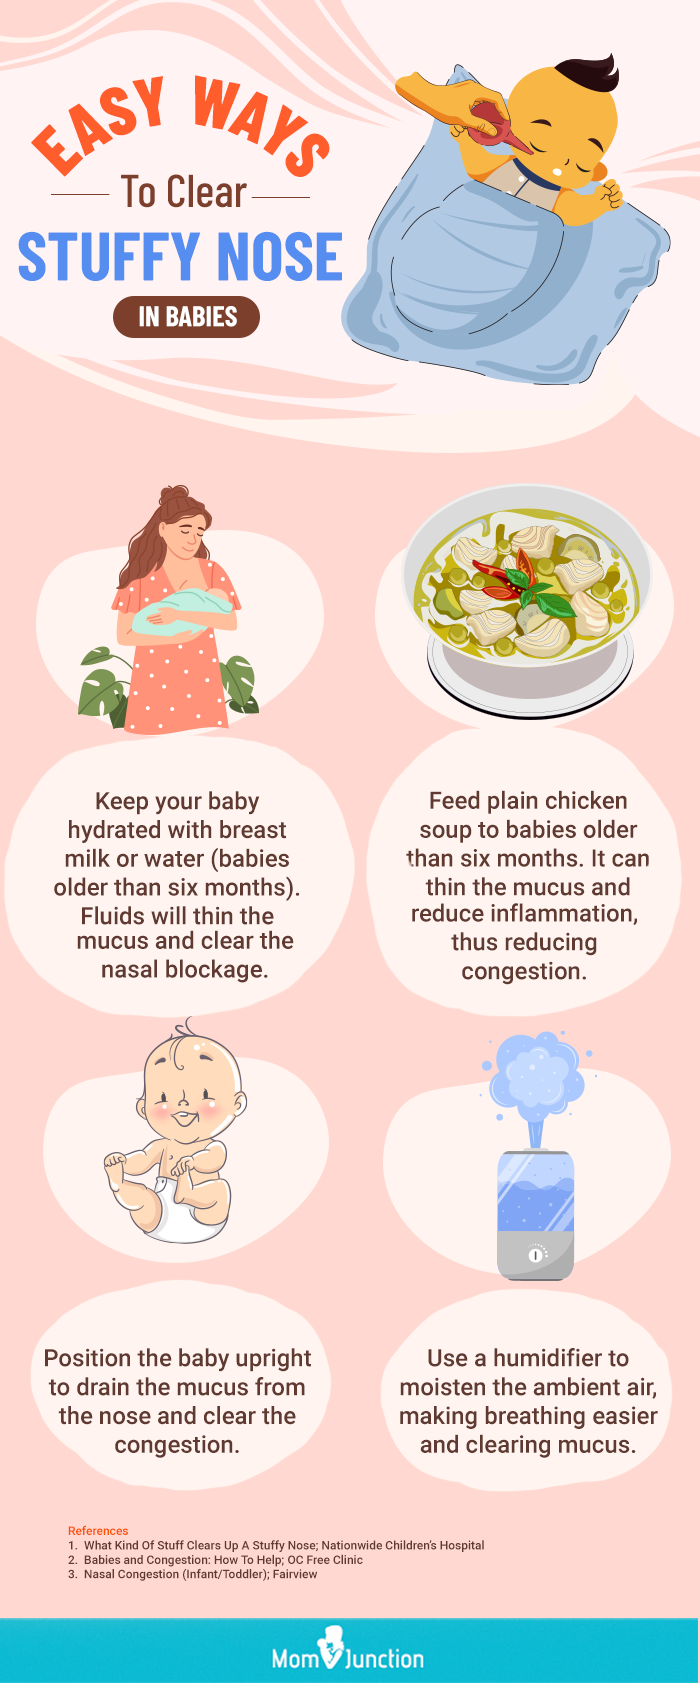 ways to clear stuffy nose in babies [infographic]